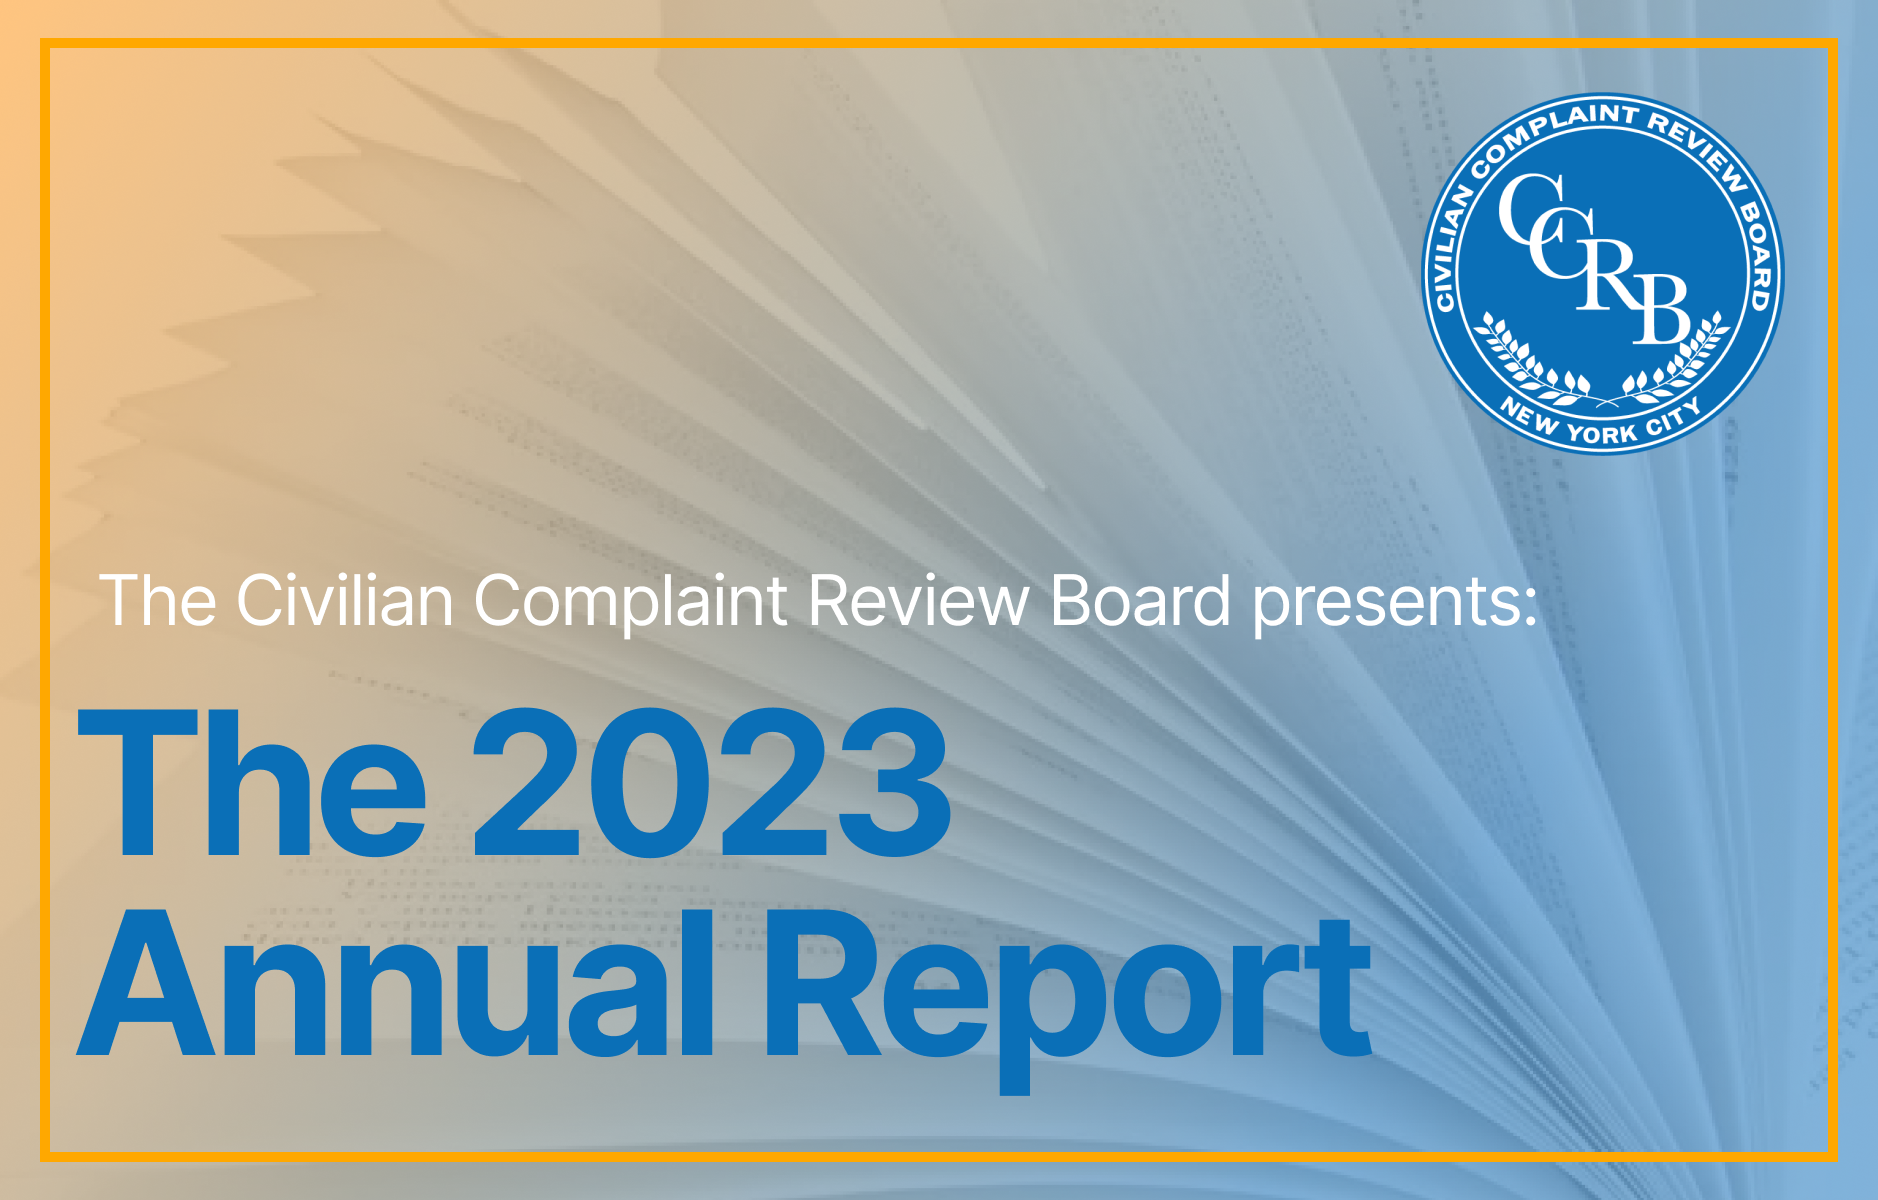 CCRB presents the 2023 Annual Report 
                                           